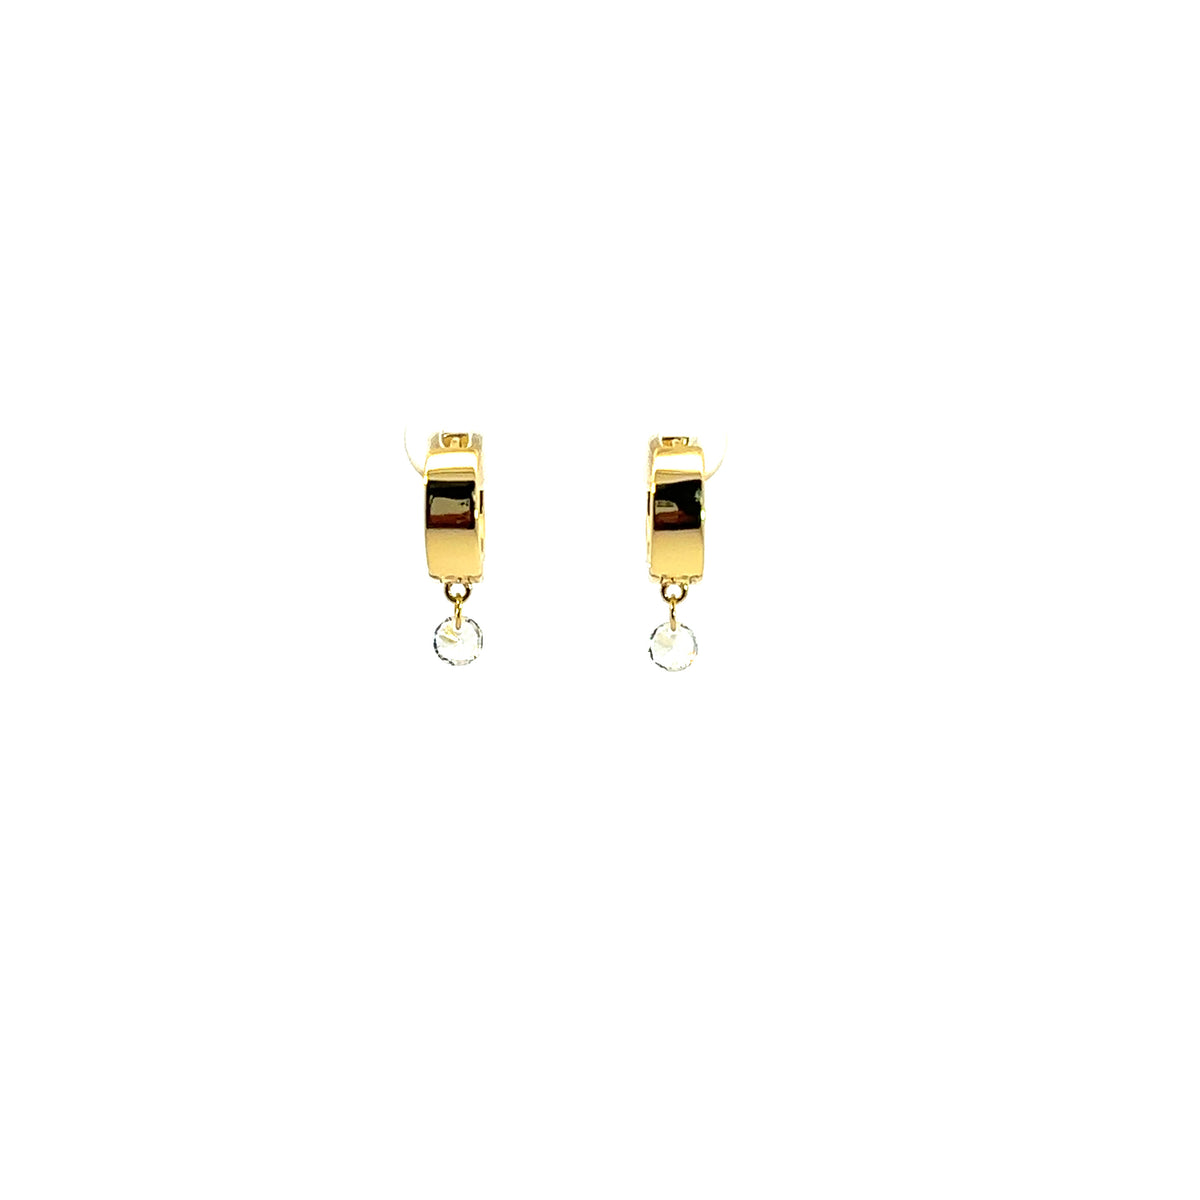 Huggie earring with drop CZ accent